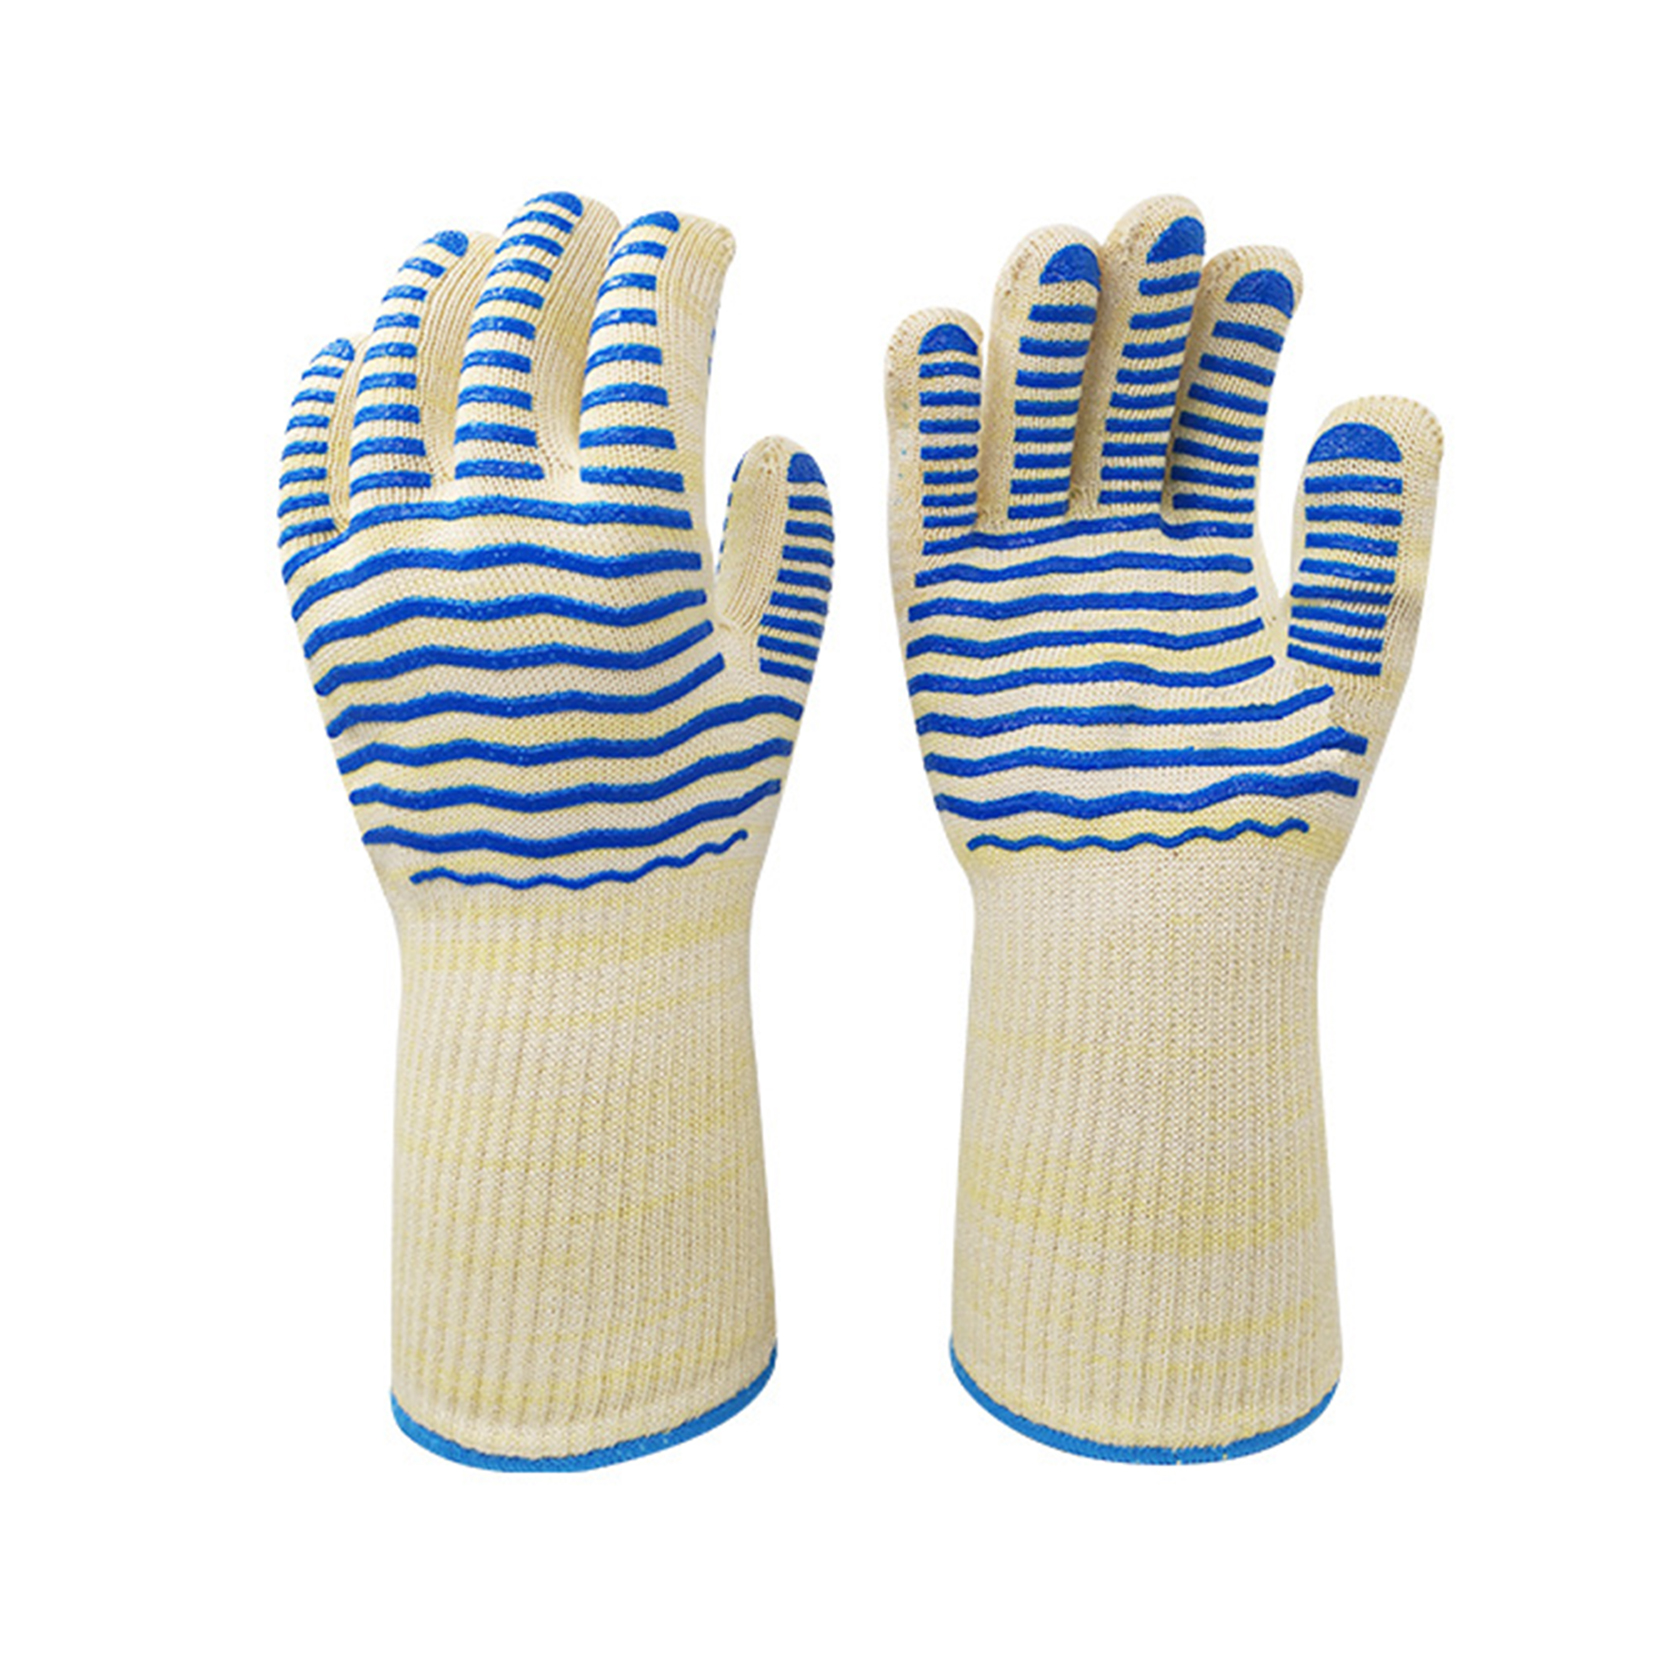 Customized Silicone Printed Heat Resistant Cooking Bbq Gloves Oven Mitten Para sa Wholesale Slip-resistant